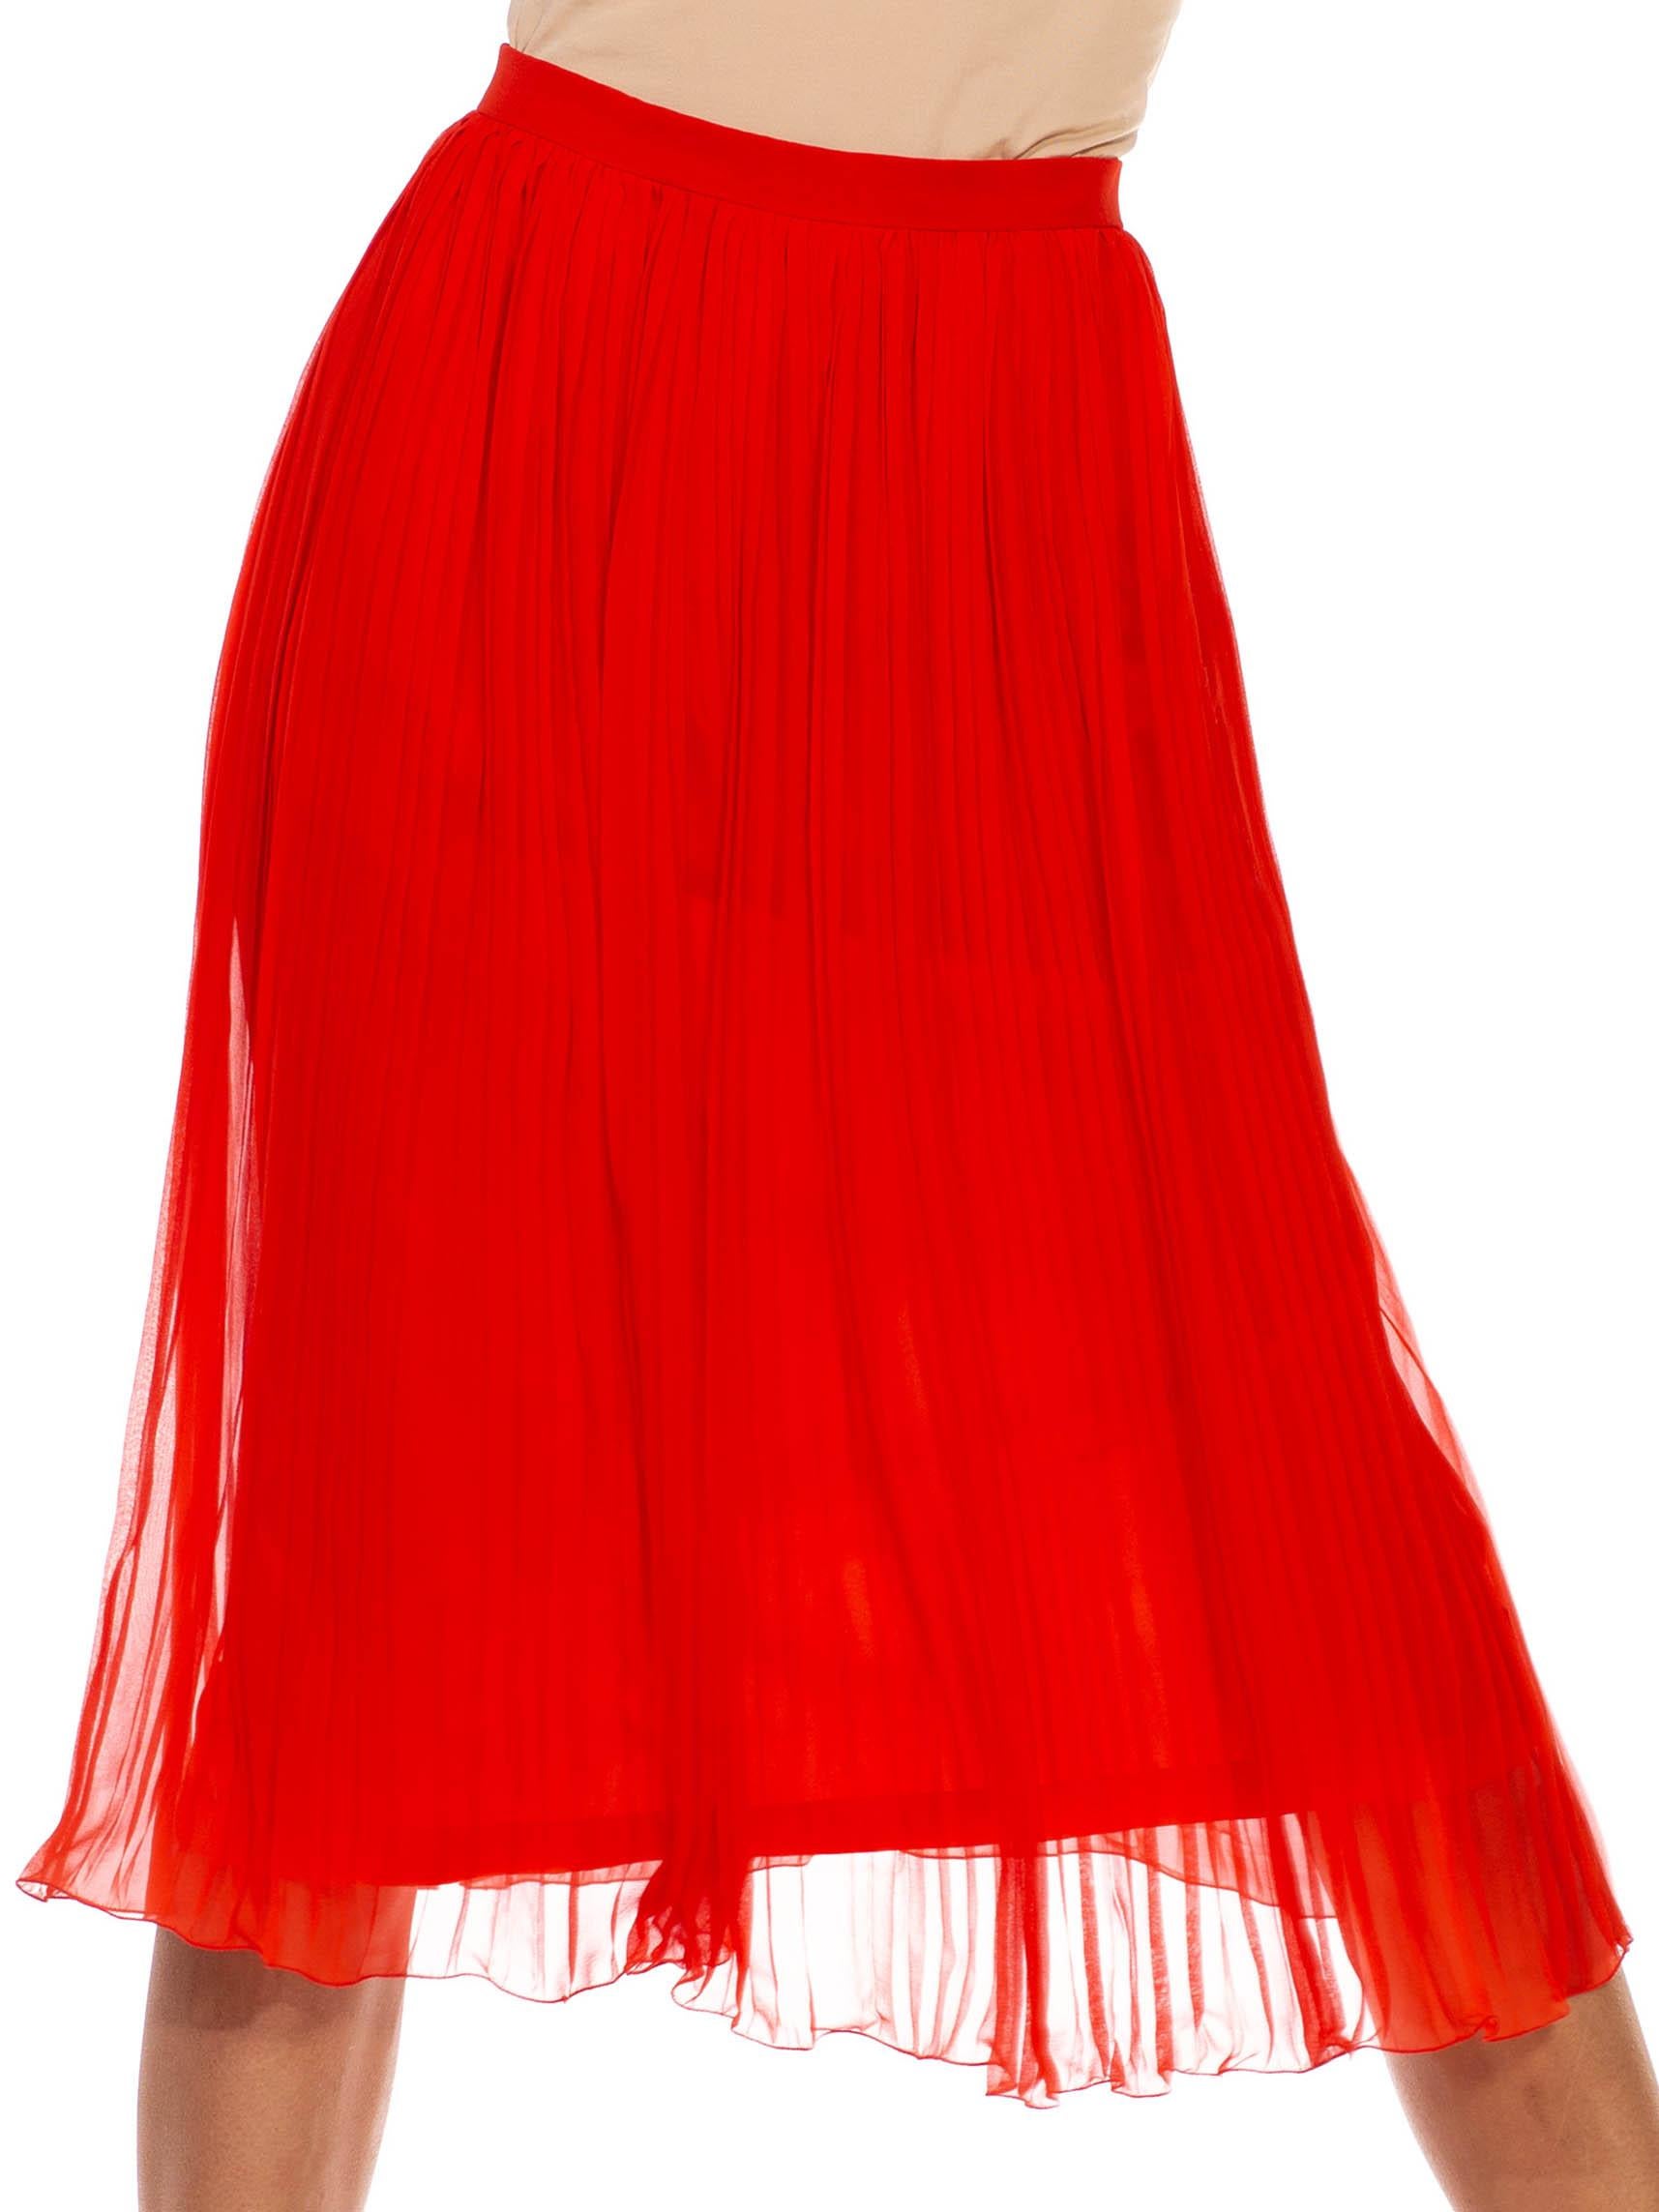 1970S CELINE Persimmon Silk Chiffon Micro Pleated Skirt In Excellent Condition For Sale In New York, NY